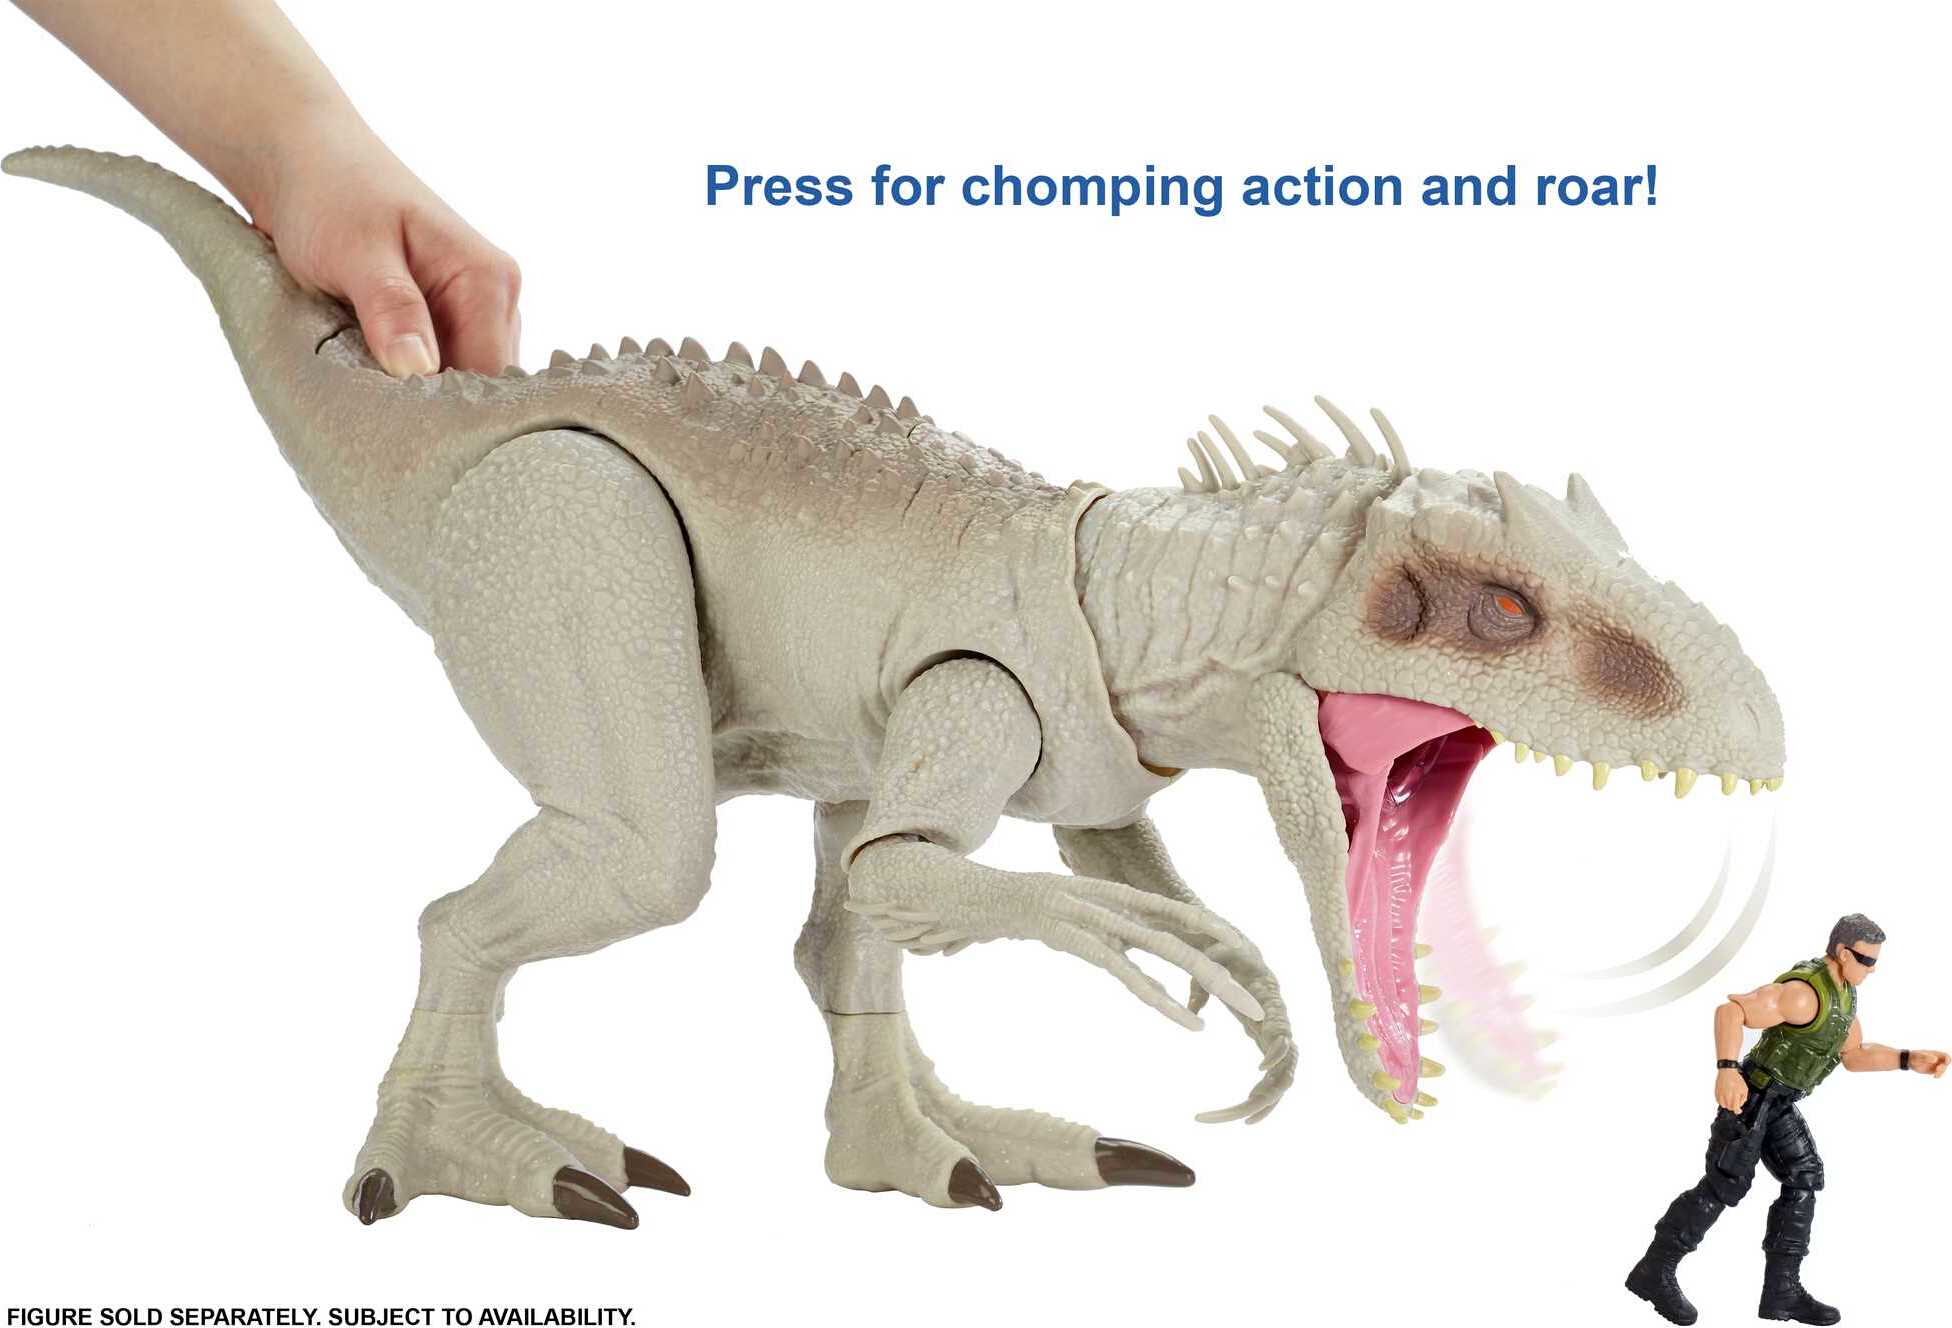 Jurassic World Destroy ‘N Devour Indominus Rex Dinosaur Action Figure with Motion, Sound and Eating Feature, Toy Gift - image 5 of 8